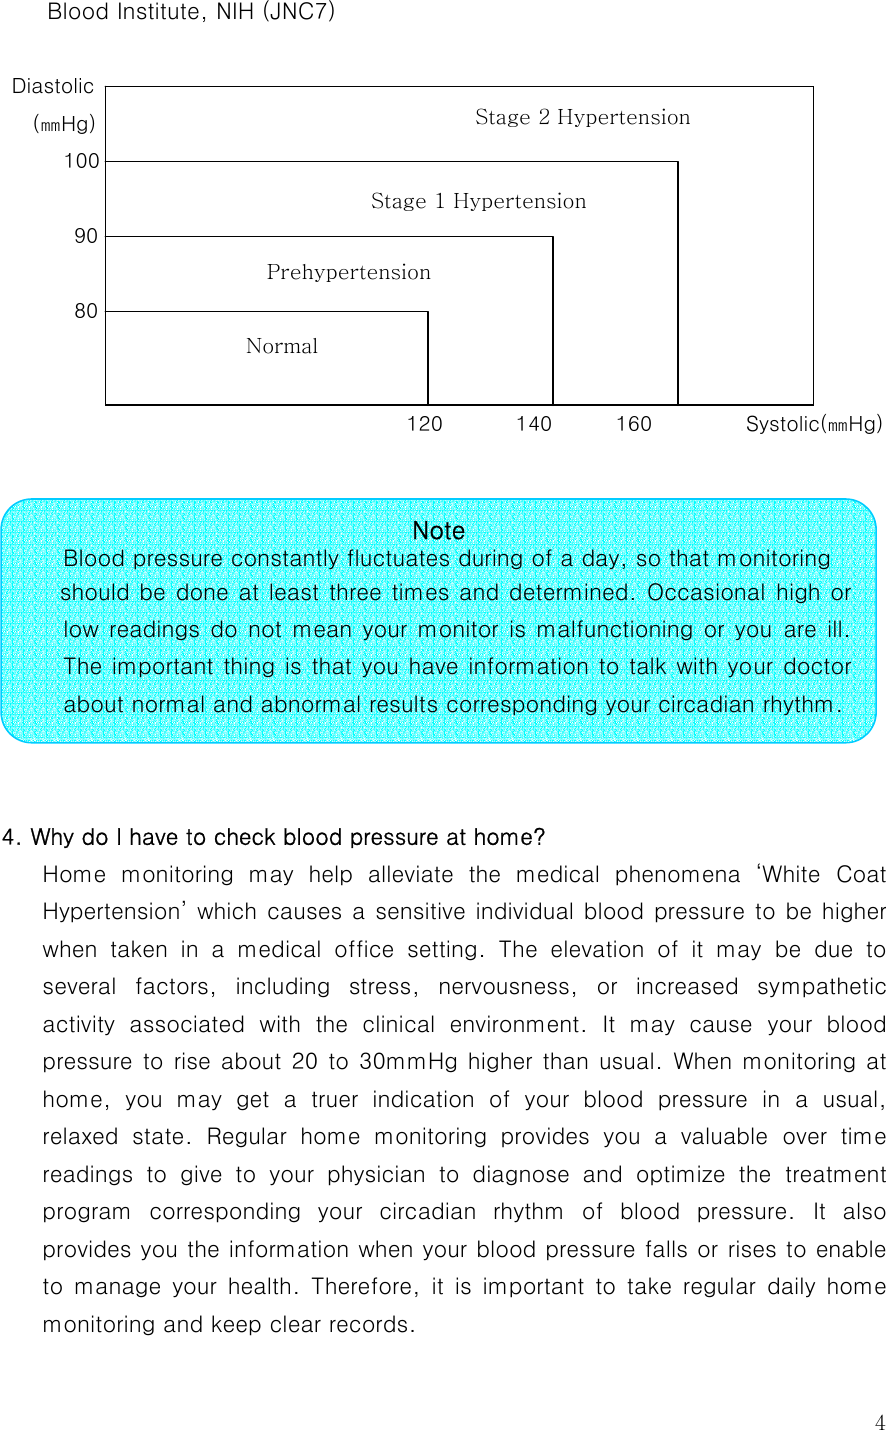  4Blood Institute, NIH (JNC7)  Diastolic    (㎜Hg)                           100                90                             80                                                 120       140        160                  Systolic(㎜Hg)                          4. Why do I have to check blood pressure at home? Home  monitoring  may  help  alleviate  the  medical  phenomena  ‘White Coat Hypertension’ which causes a sensitive individual blood pressure to be higher when  taken  in  a  medical  office  setting.  The  elevation  of  it  may be due to several  factors,  including  stress,  nervousness,  or  increased  sympathetic activity  associated  with  the  clinical  environment.  It  may  cause  your  blood pressure to rise about 20 to 30mmHg higher than usual. When monitoring  at home,  you  may  get  a  truer  indication  of  your  blood  pressure  in  a  usual, relaxed  state.  Regular  home  monitoring  provides  you  a  valuable  over  time readings  to  give  to  your  physician  to  diagnose  and  optimize  the treatment program  corresponding  your  circadian  rhythm  of  blood  pressure.  It  also provides you the information when your blood pressure falls or rises to enable to  manage  your  health.  Therefore,  it  is  important  to  take  regular  daily  home monitoring and keep clear records. Note    Blood pressure constantly fluctuates during of a day, so that monitoring   should be done at least three times and determined. Occasional high or low readings  do  not mean  your monitor  is  malfunctioning  or  you  are ill. The important thing is that you have information to talk with your doctor about normal and abnormal results corresponding your circadian rhythm. Stage 2 Hypertension  Stage 1 Hypertension  Prehypertension  Normal 